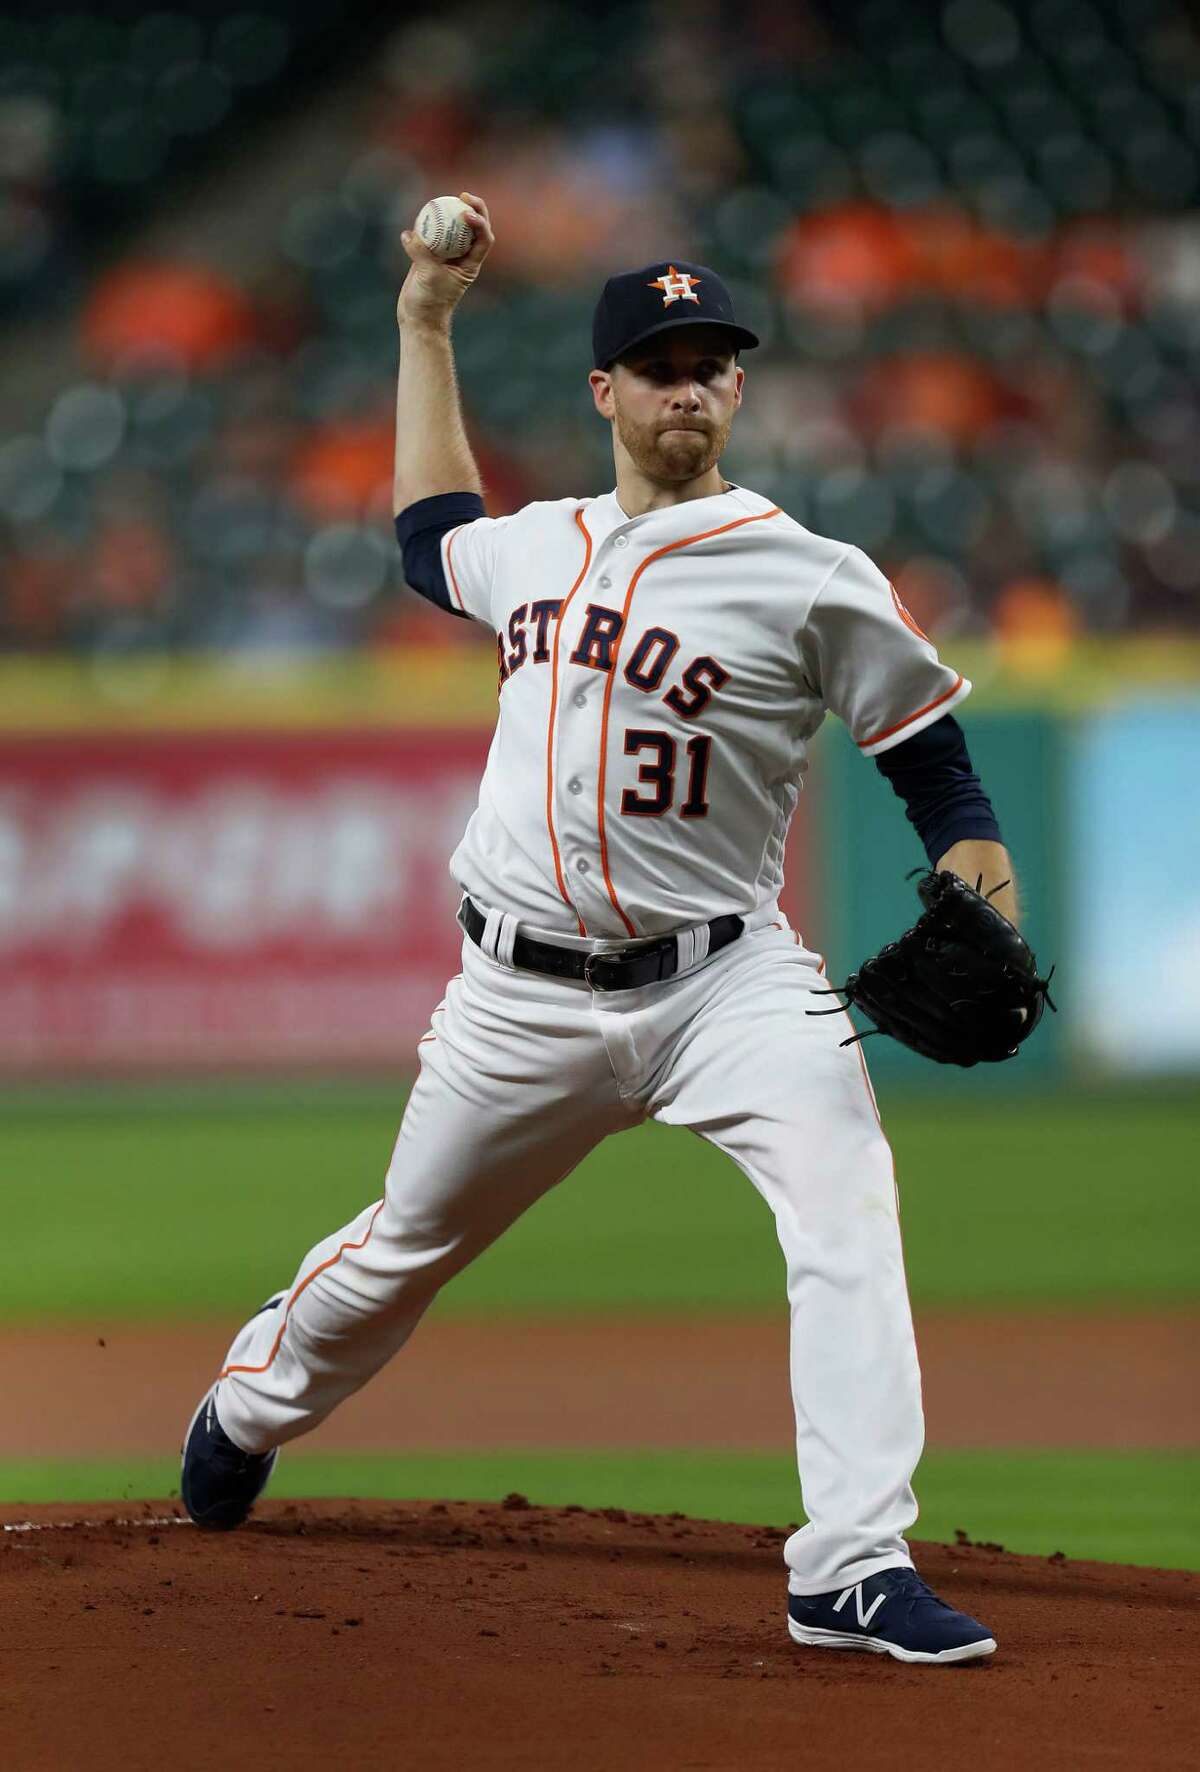 Houston Astros starting pitcher Collin McHugh (31) pitches in the first inning of an MLB game at Minute Maid Park, Monday, Sept. 26, 2016 in Houston.